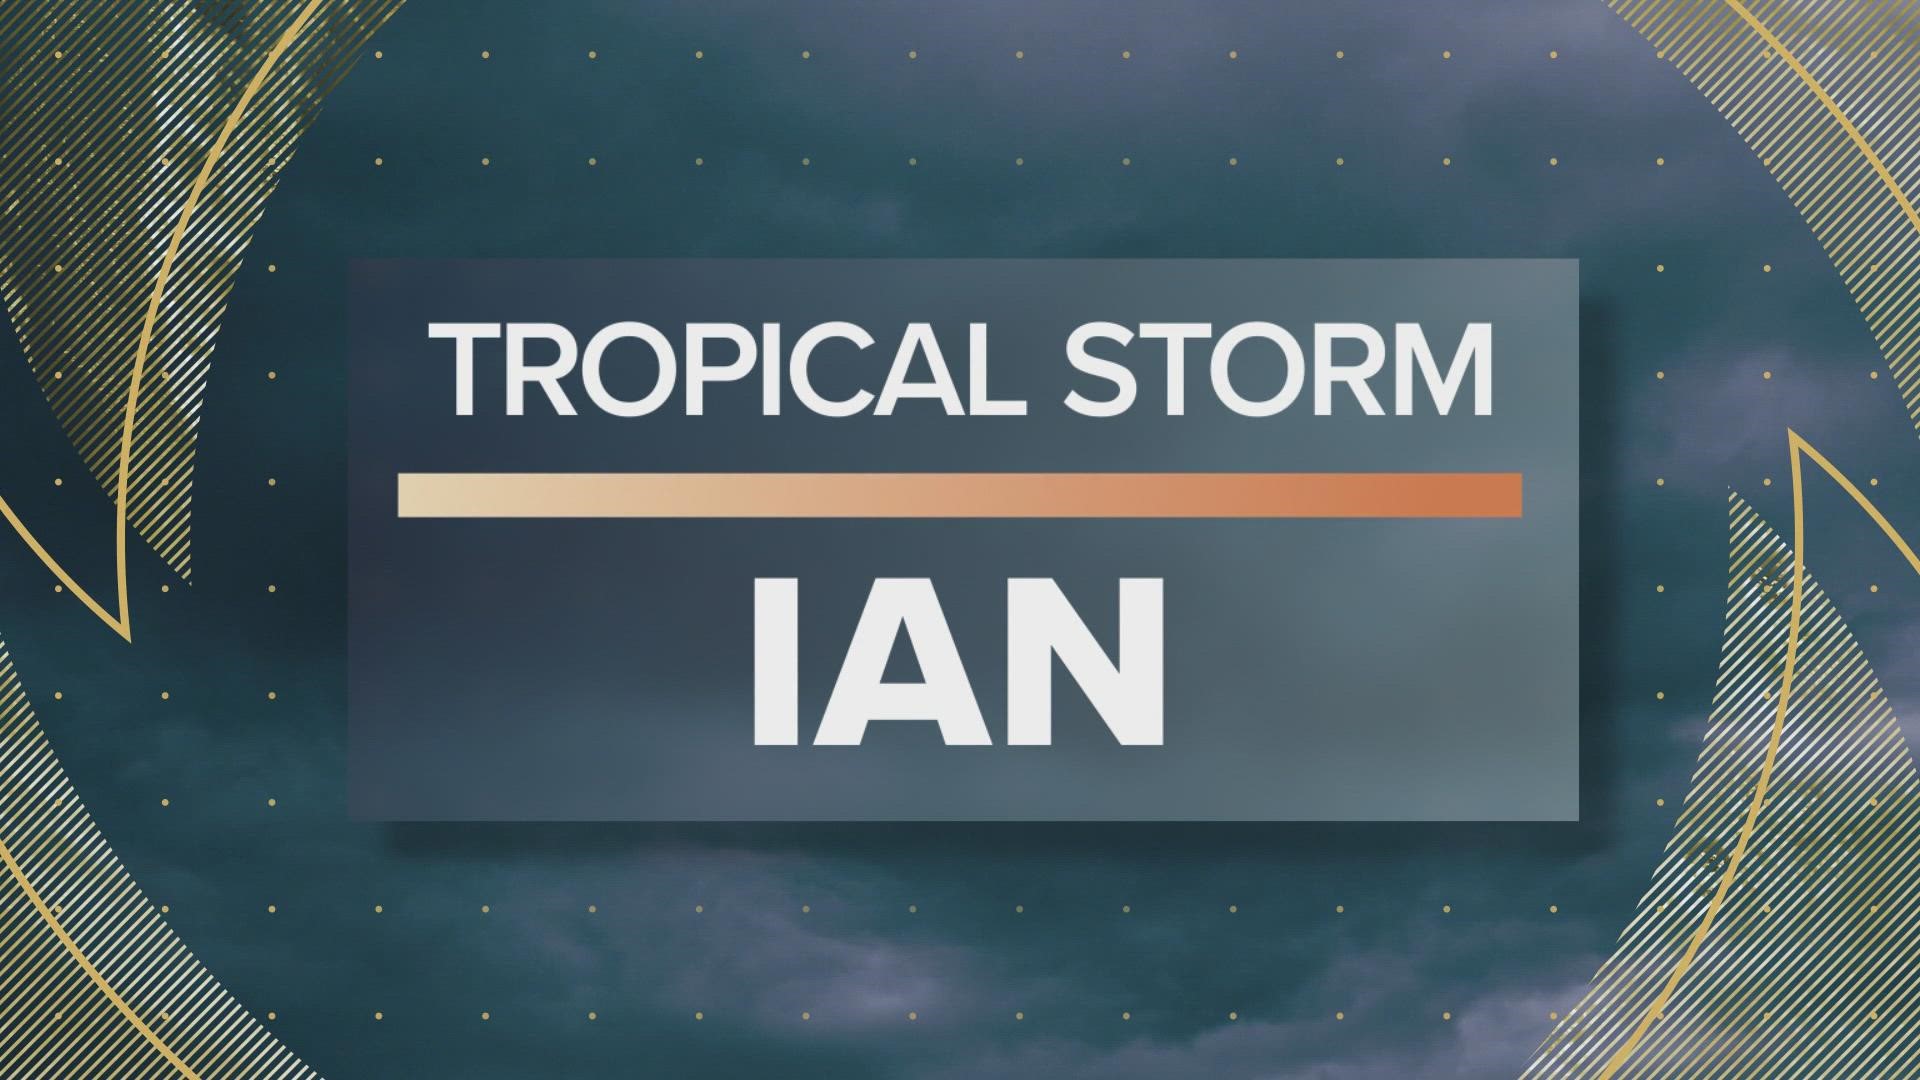 Tropical Storm Ian is forecast to become a Category 4 hurricane as it approaches the Gulf of Mexico and looks to make landfall in the U.S.